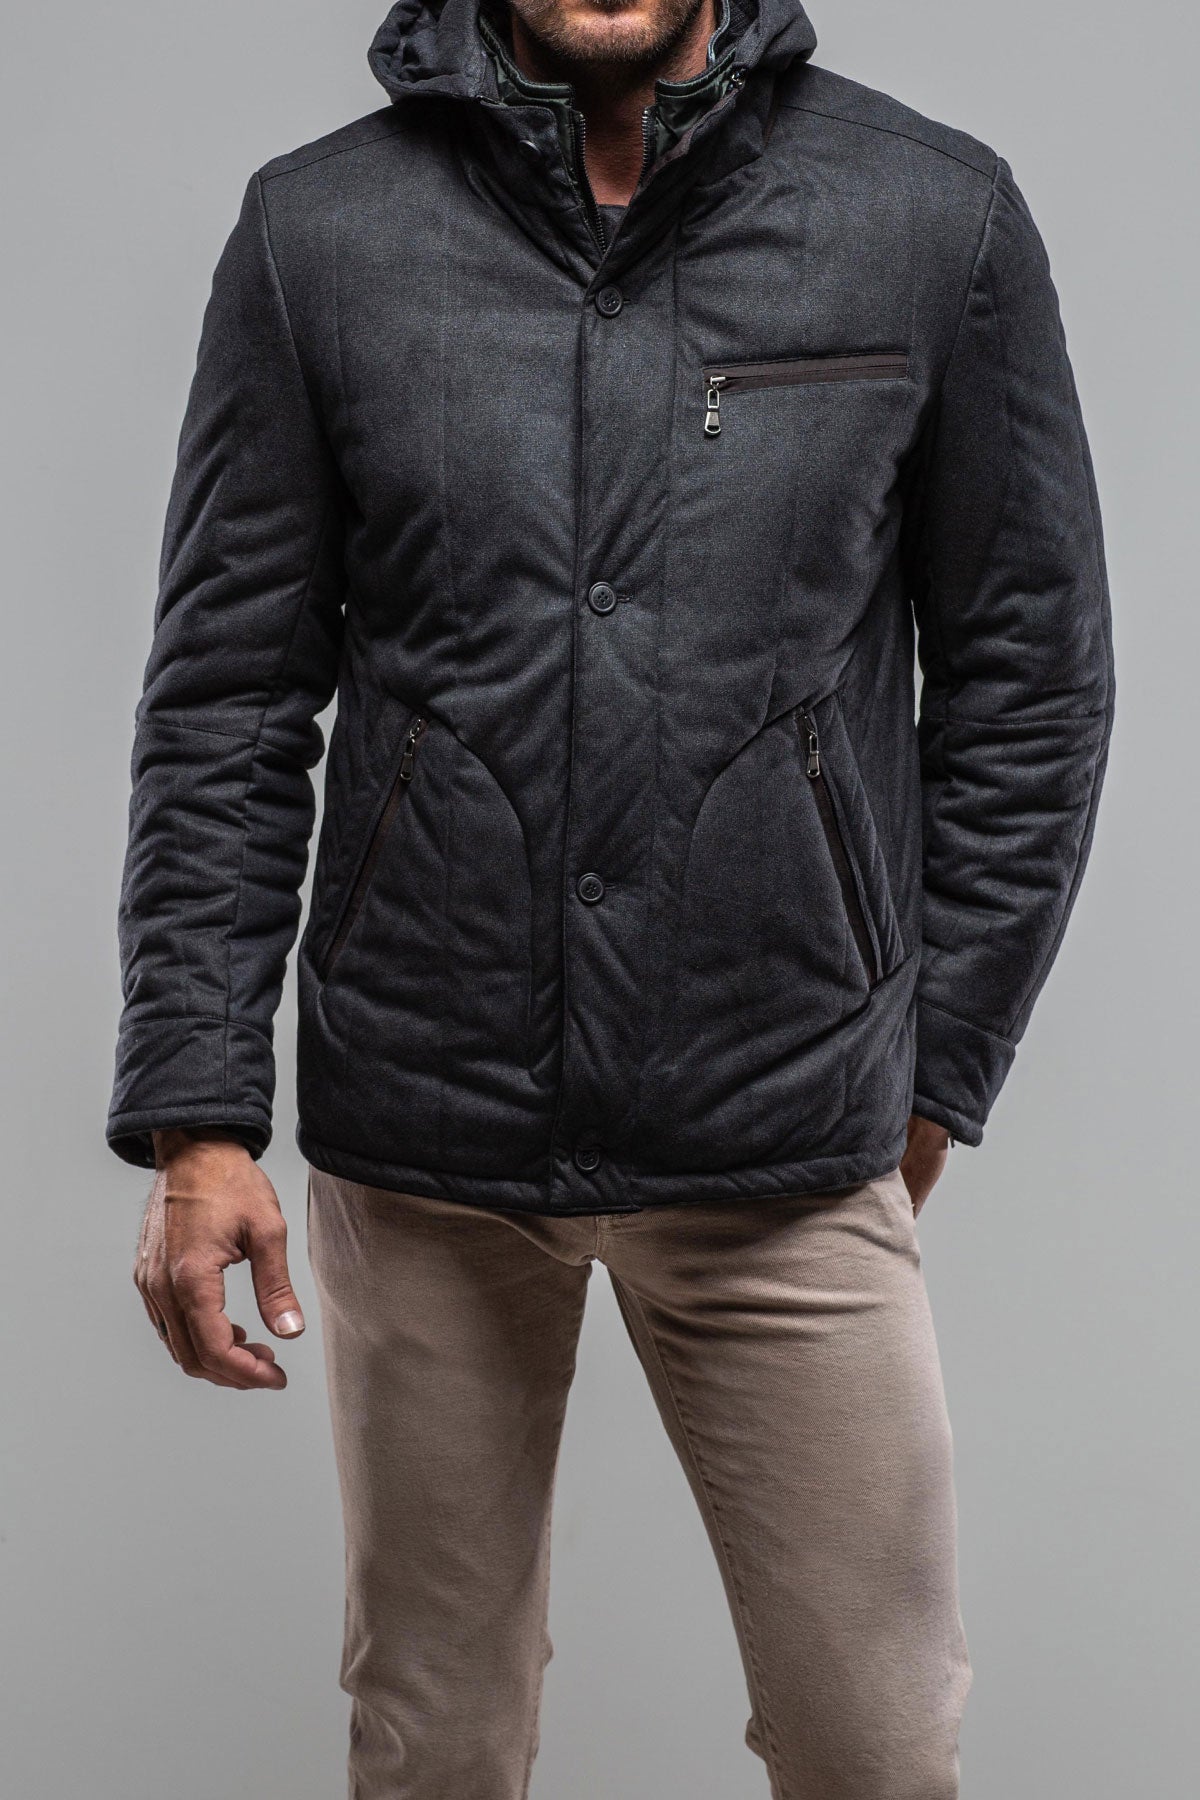 Rollins Jacket | Warehouse - Mens - Outerwear - Cloth | Gimo's